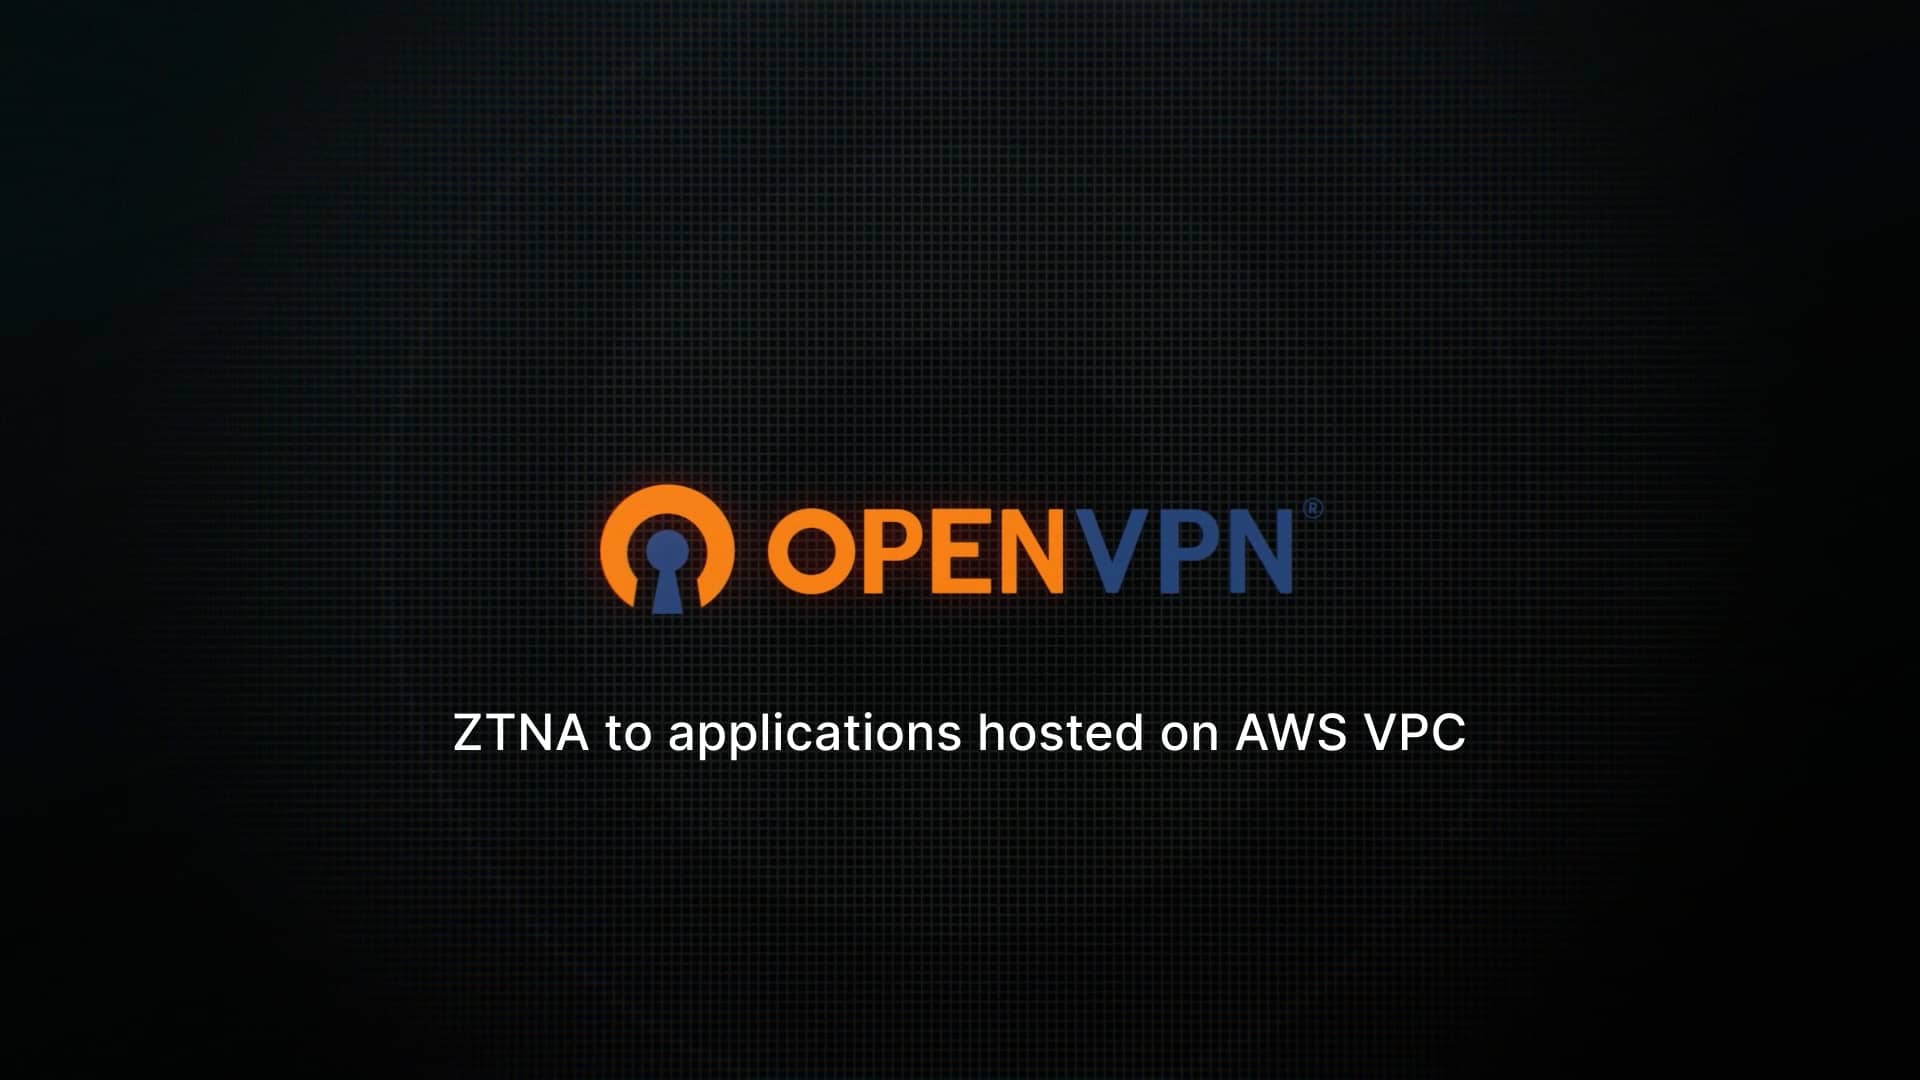 OpenVPN Cloud: ZTNA to Applications Hosted on AWS VPC on Vimeo